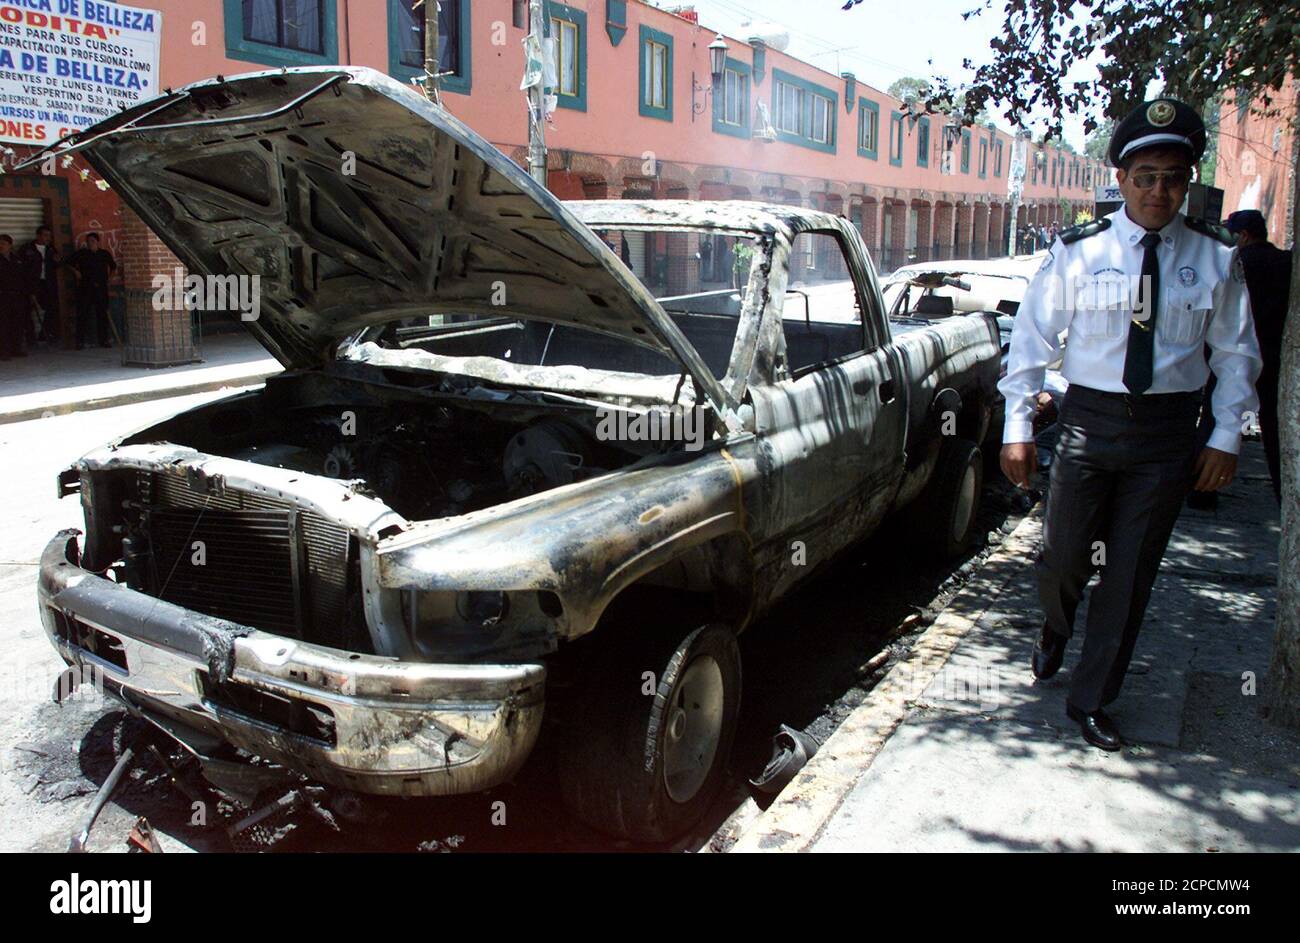 A policeman walks past a burnt out pick-up truck in the outlying Mexico City suburb of Chimalhuacan after a riot which left six people dead August 18, 2000. Rival factions of the long ruling PRI party clashed over control of the local town hall after supporters of the elected mayor and followers of a local PRI matriarch known as La Loba (the She Wolf) exchanged gunfire.  AW Stock Photo